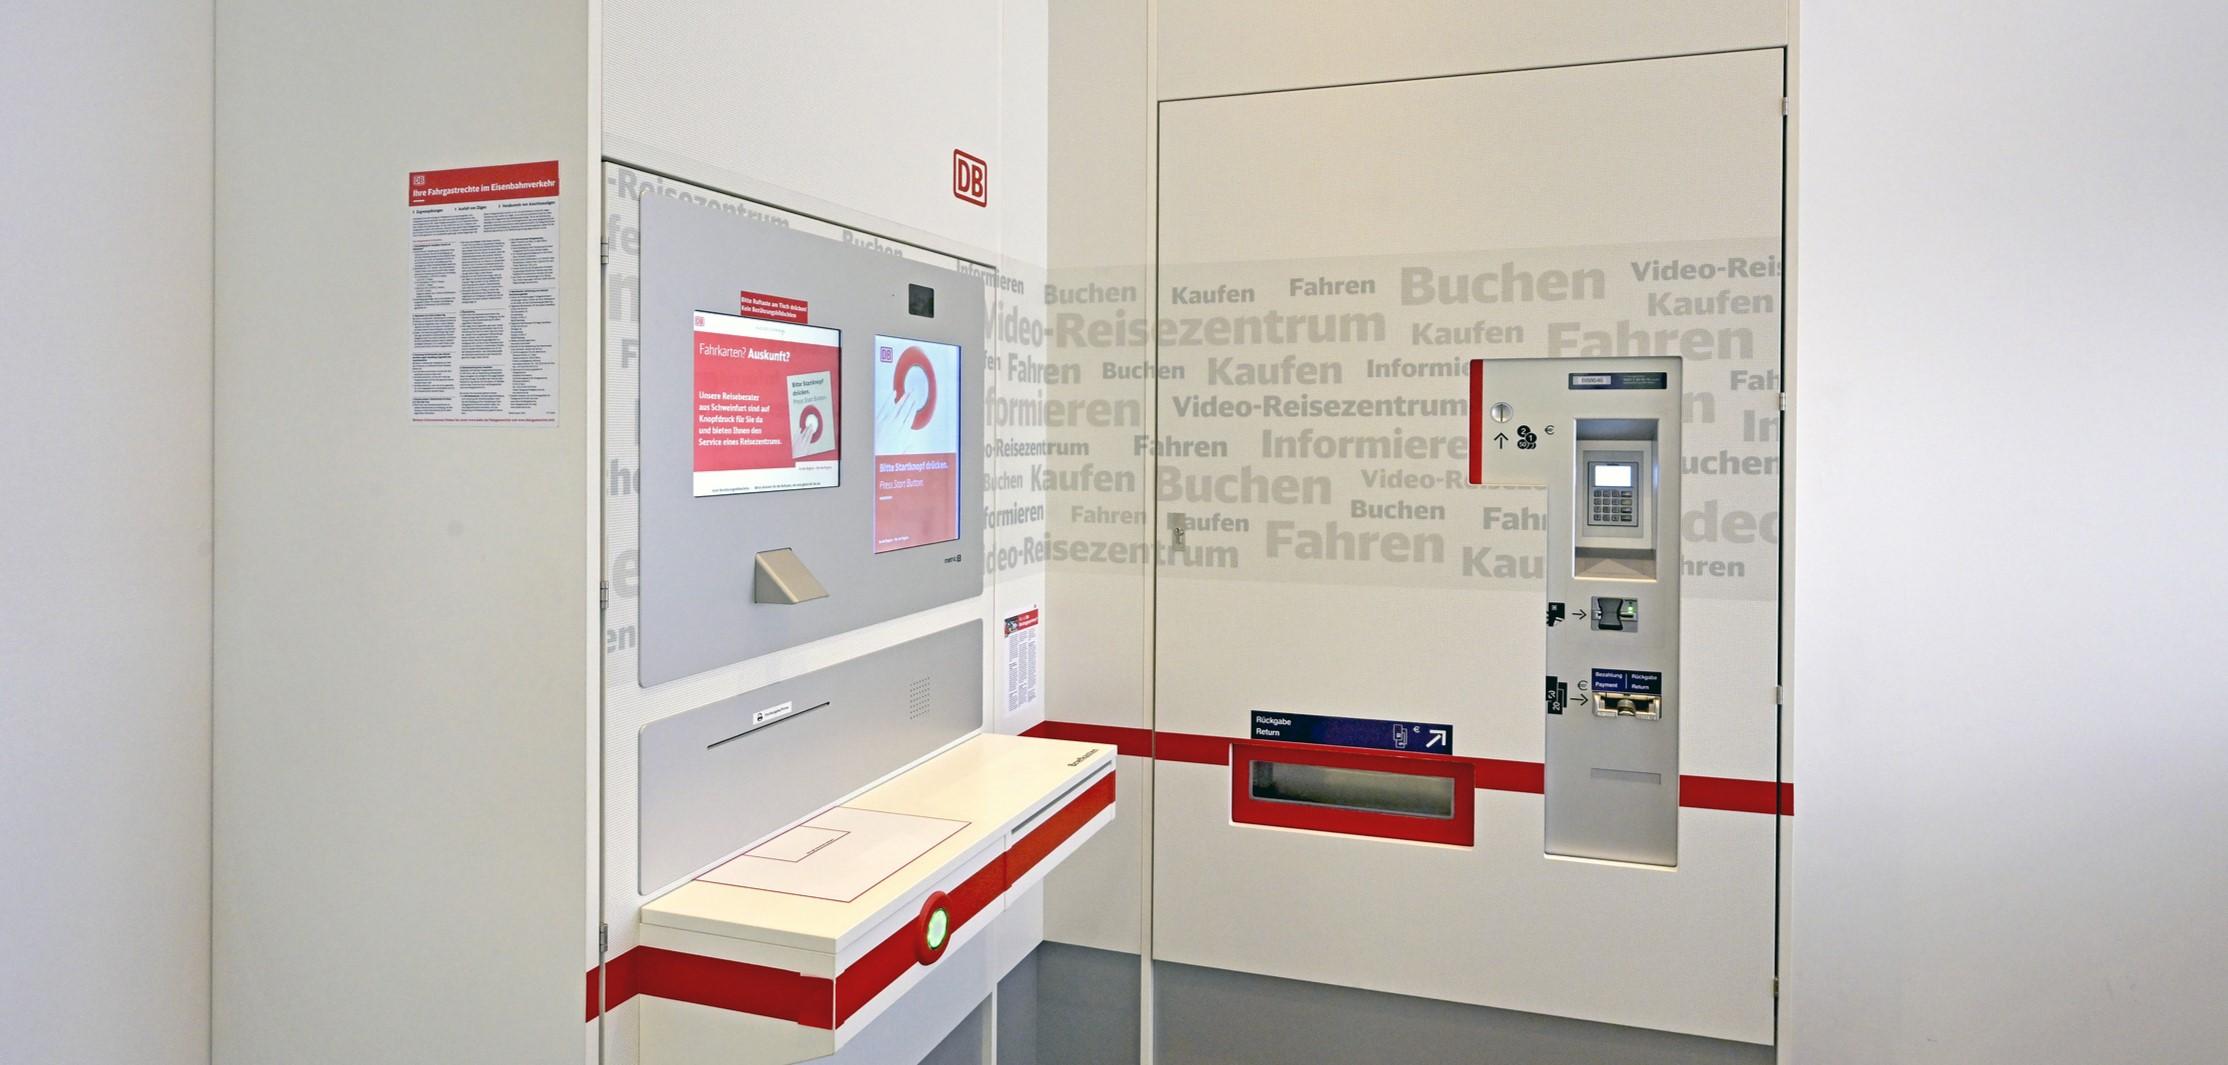 A DB video travel centre consisting of two screens and a payment terminal.